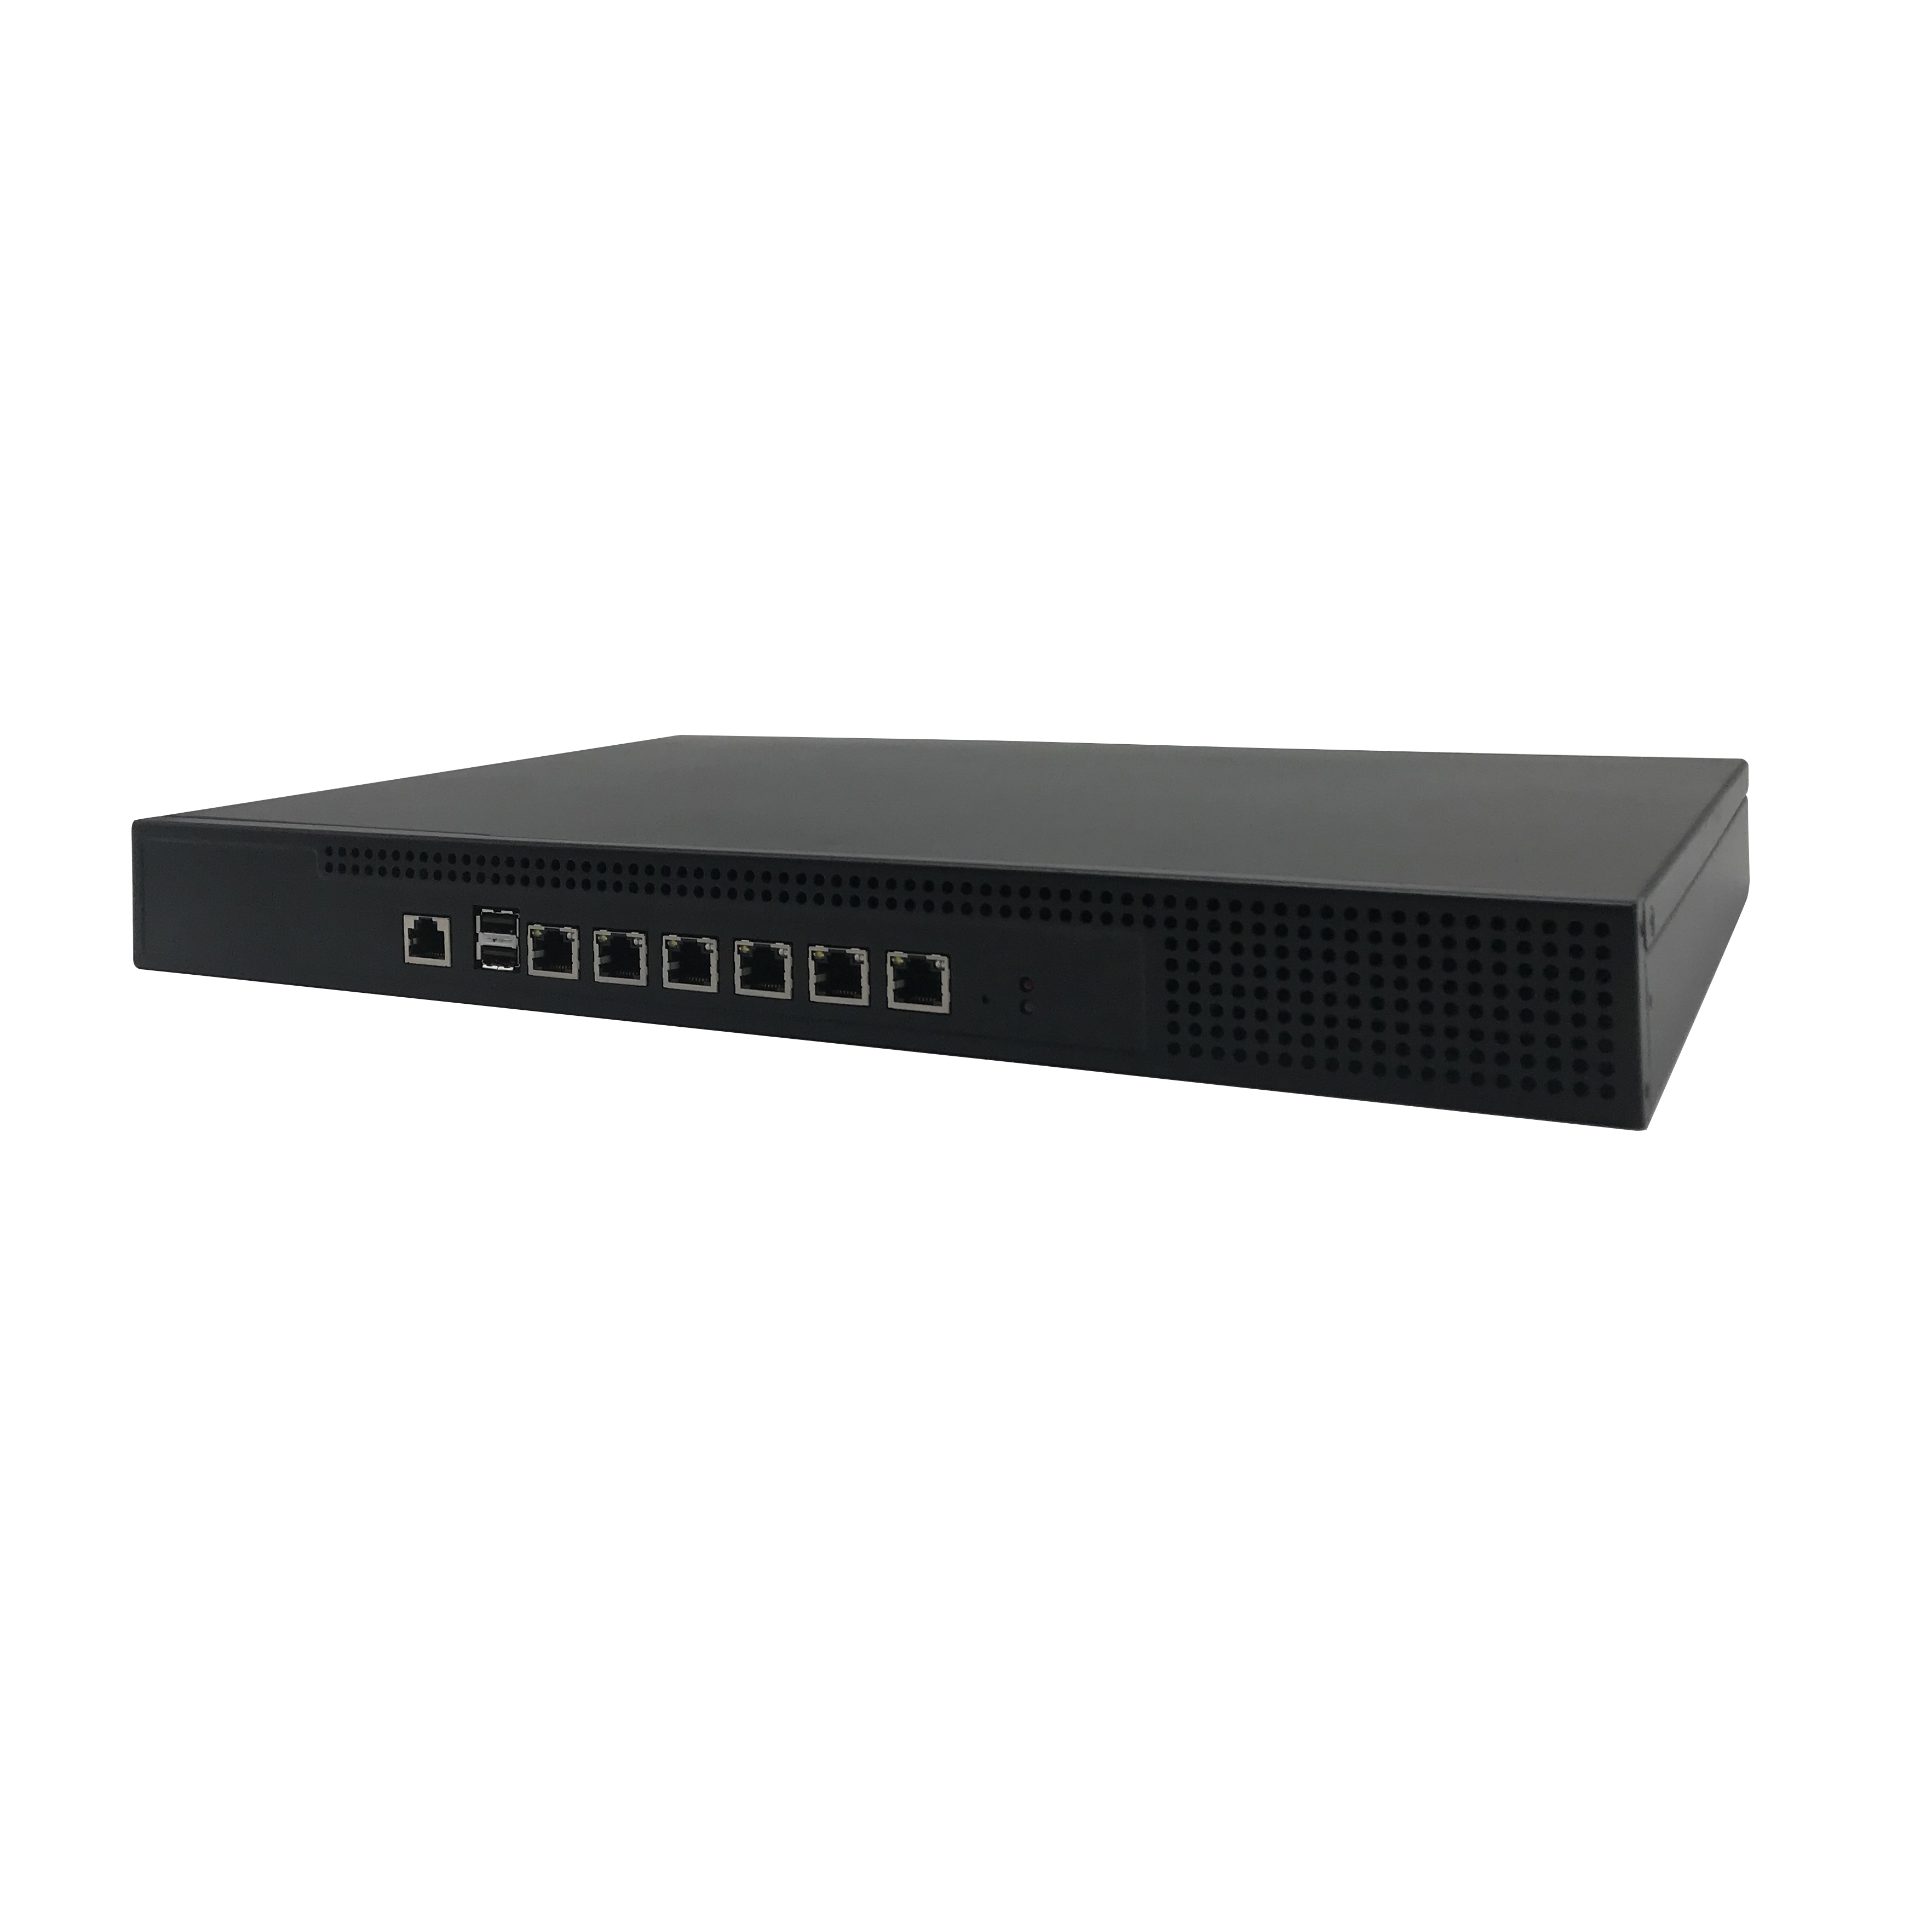 the newest Intel H67/B75 1U rackmount 6 GbE LAN best computer network security appliance hardware VPN network monitoring system